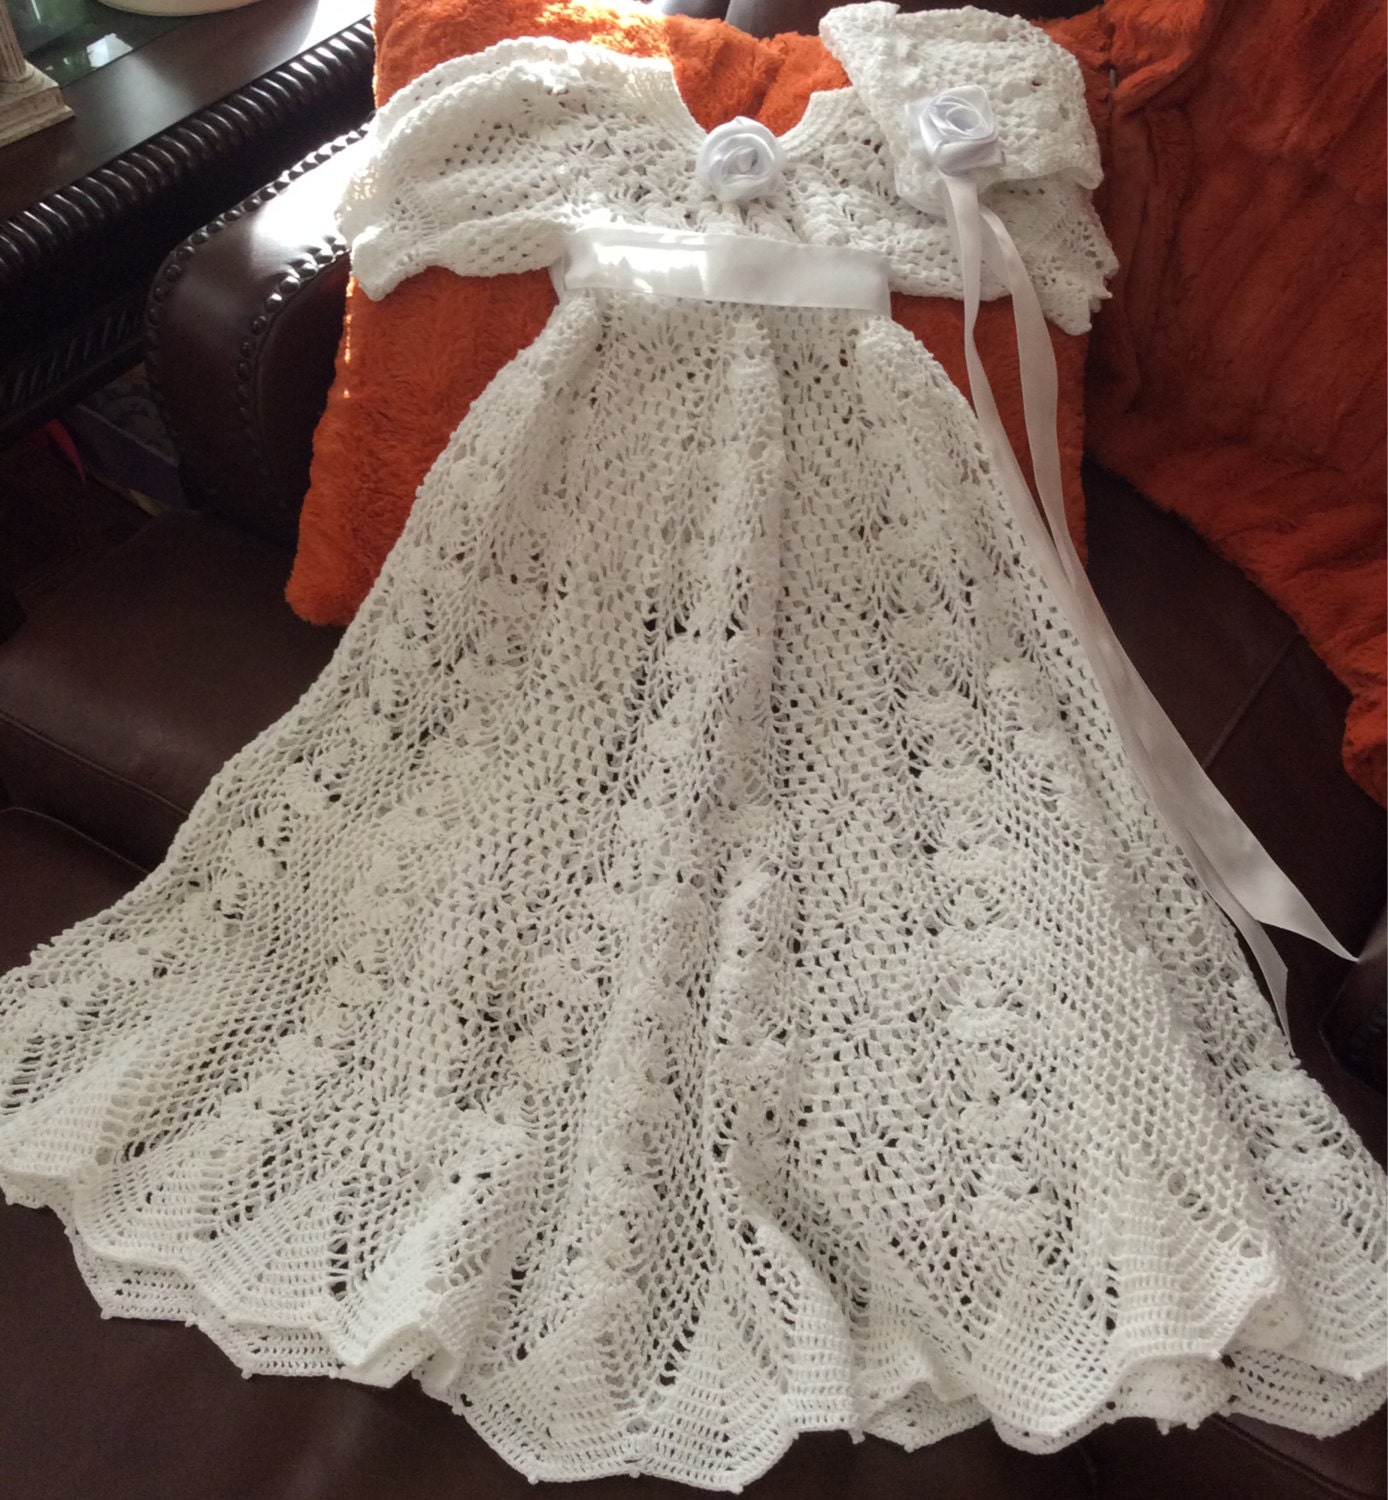 Heirloom quality hand crochet baby christening gown and cap